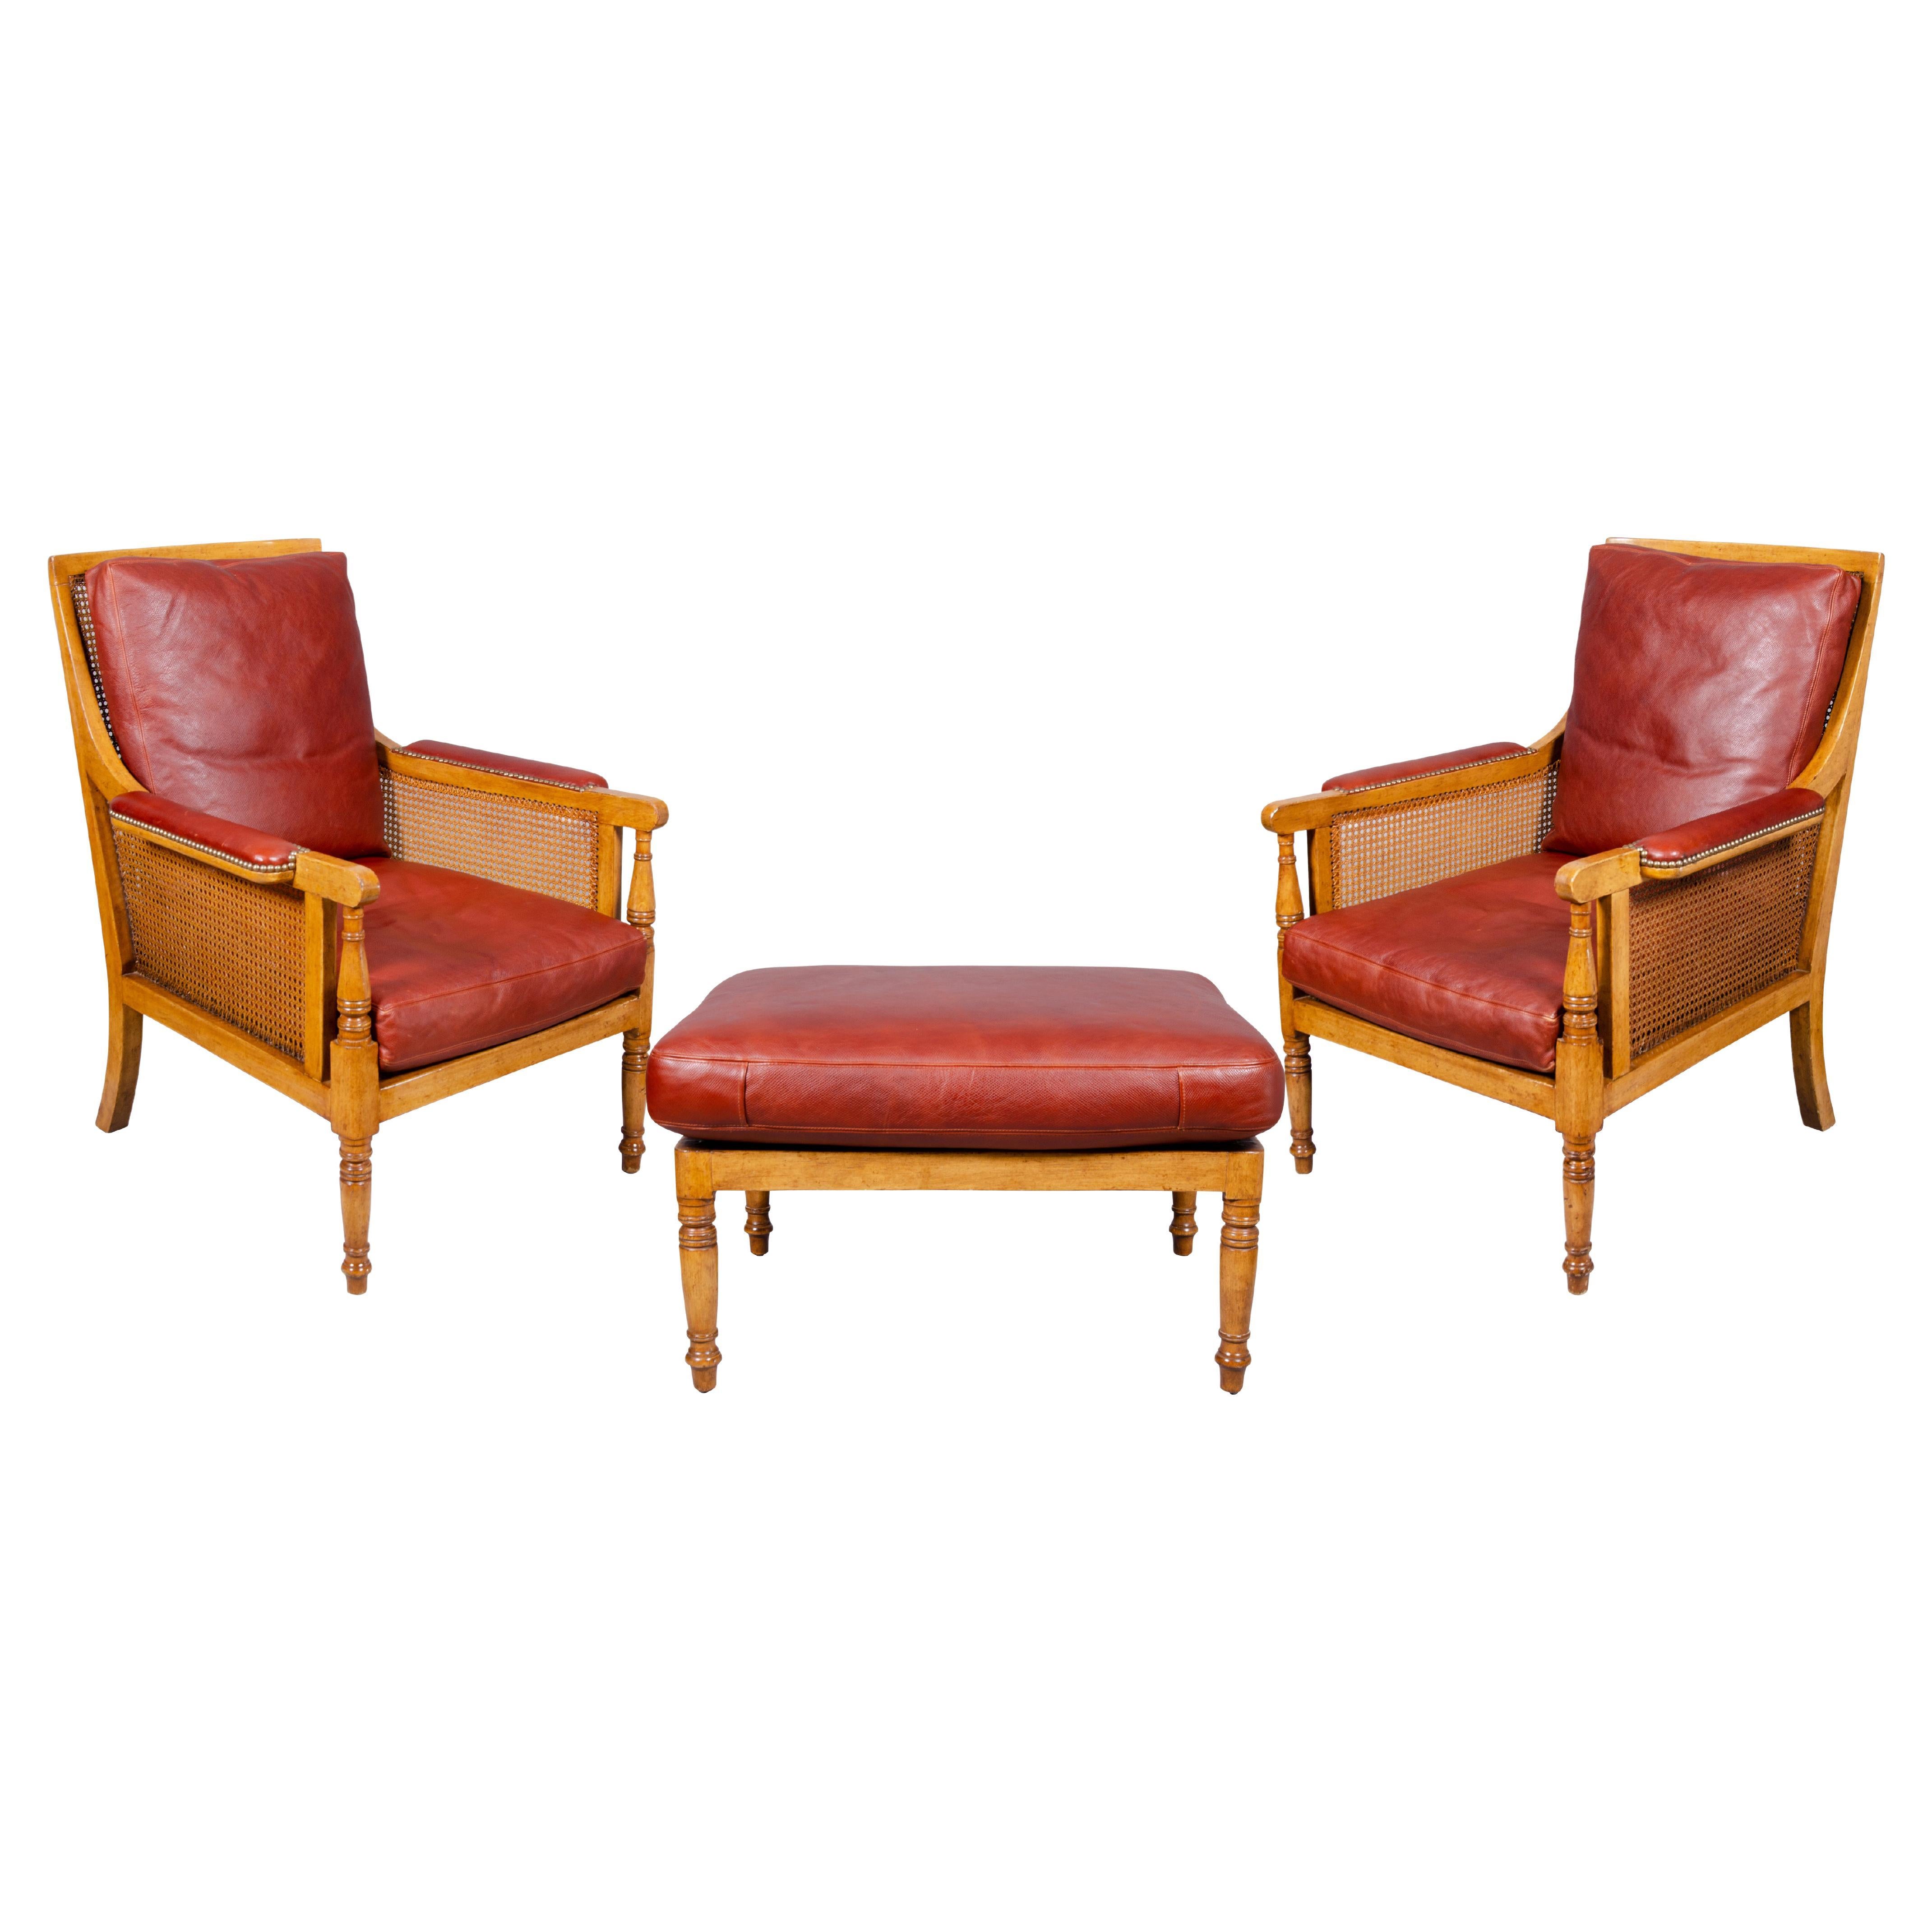 Pair of Edwardian Maple and Caned Bergere Chairs